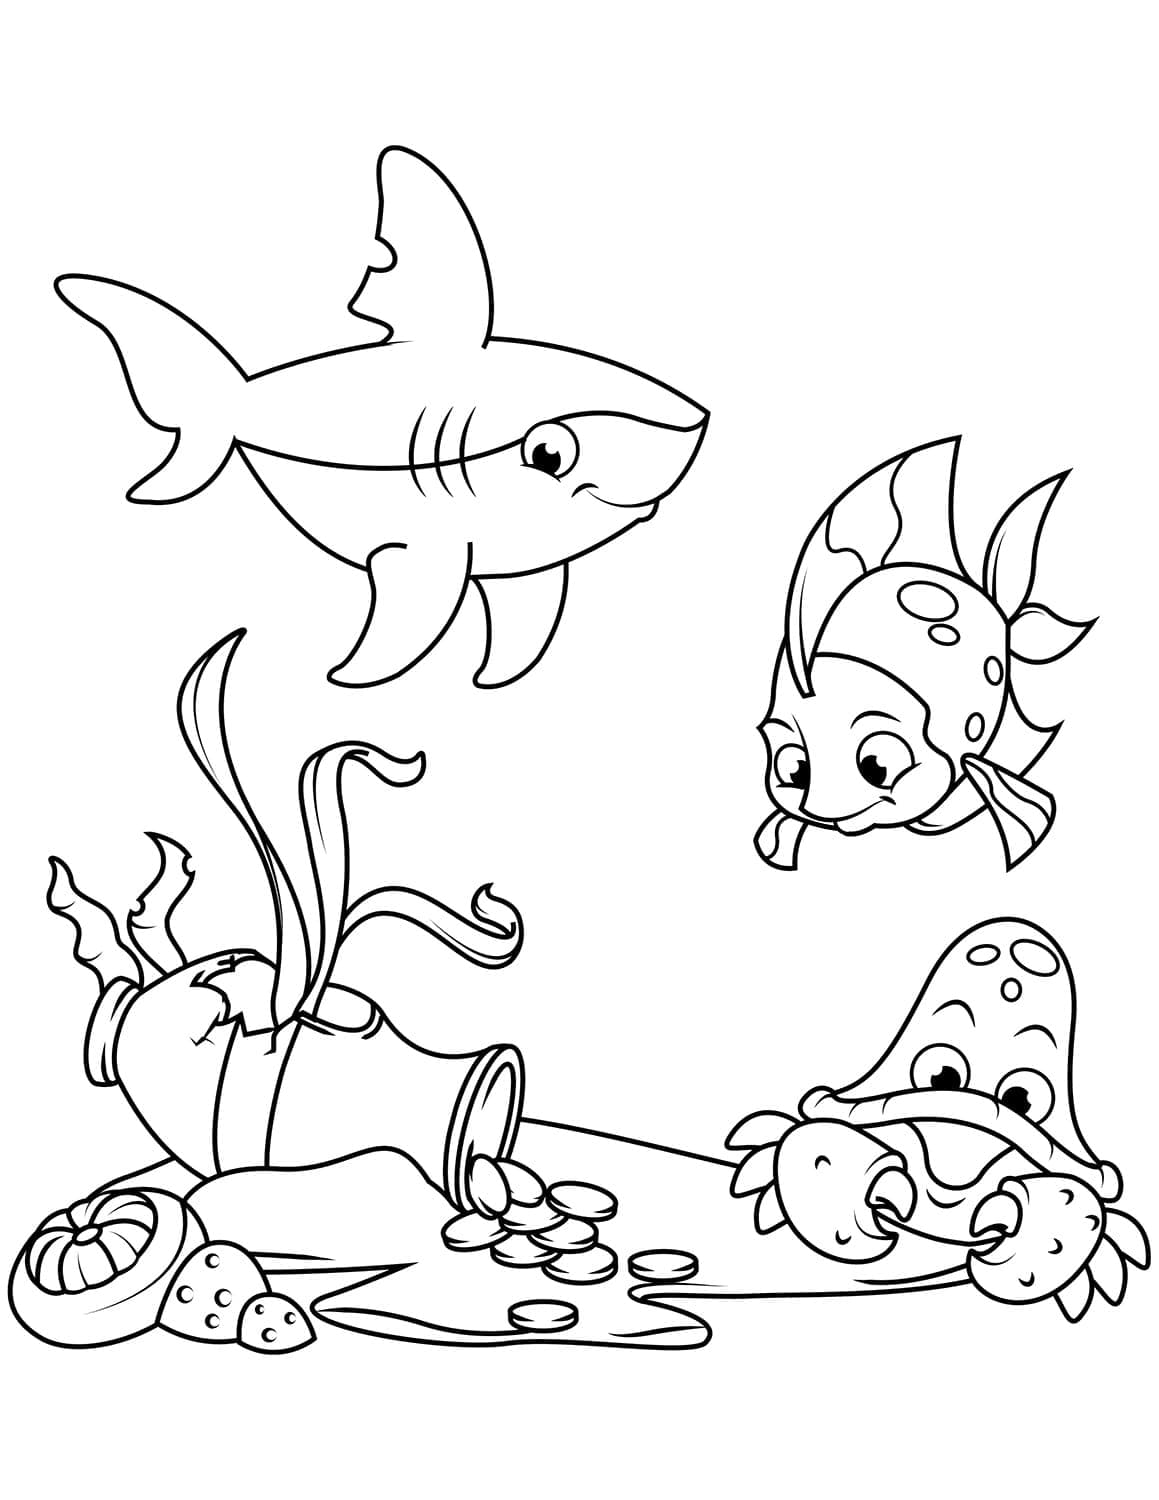 under-the-sea-coloring-pages-coloringlib